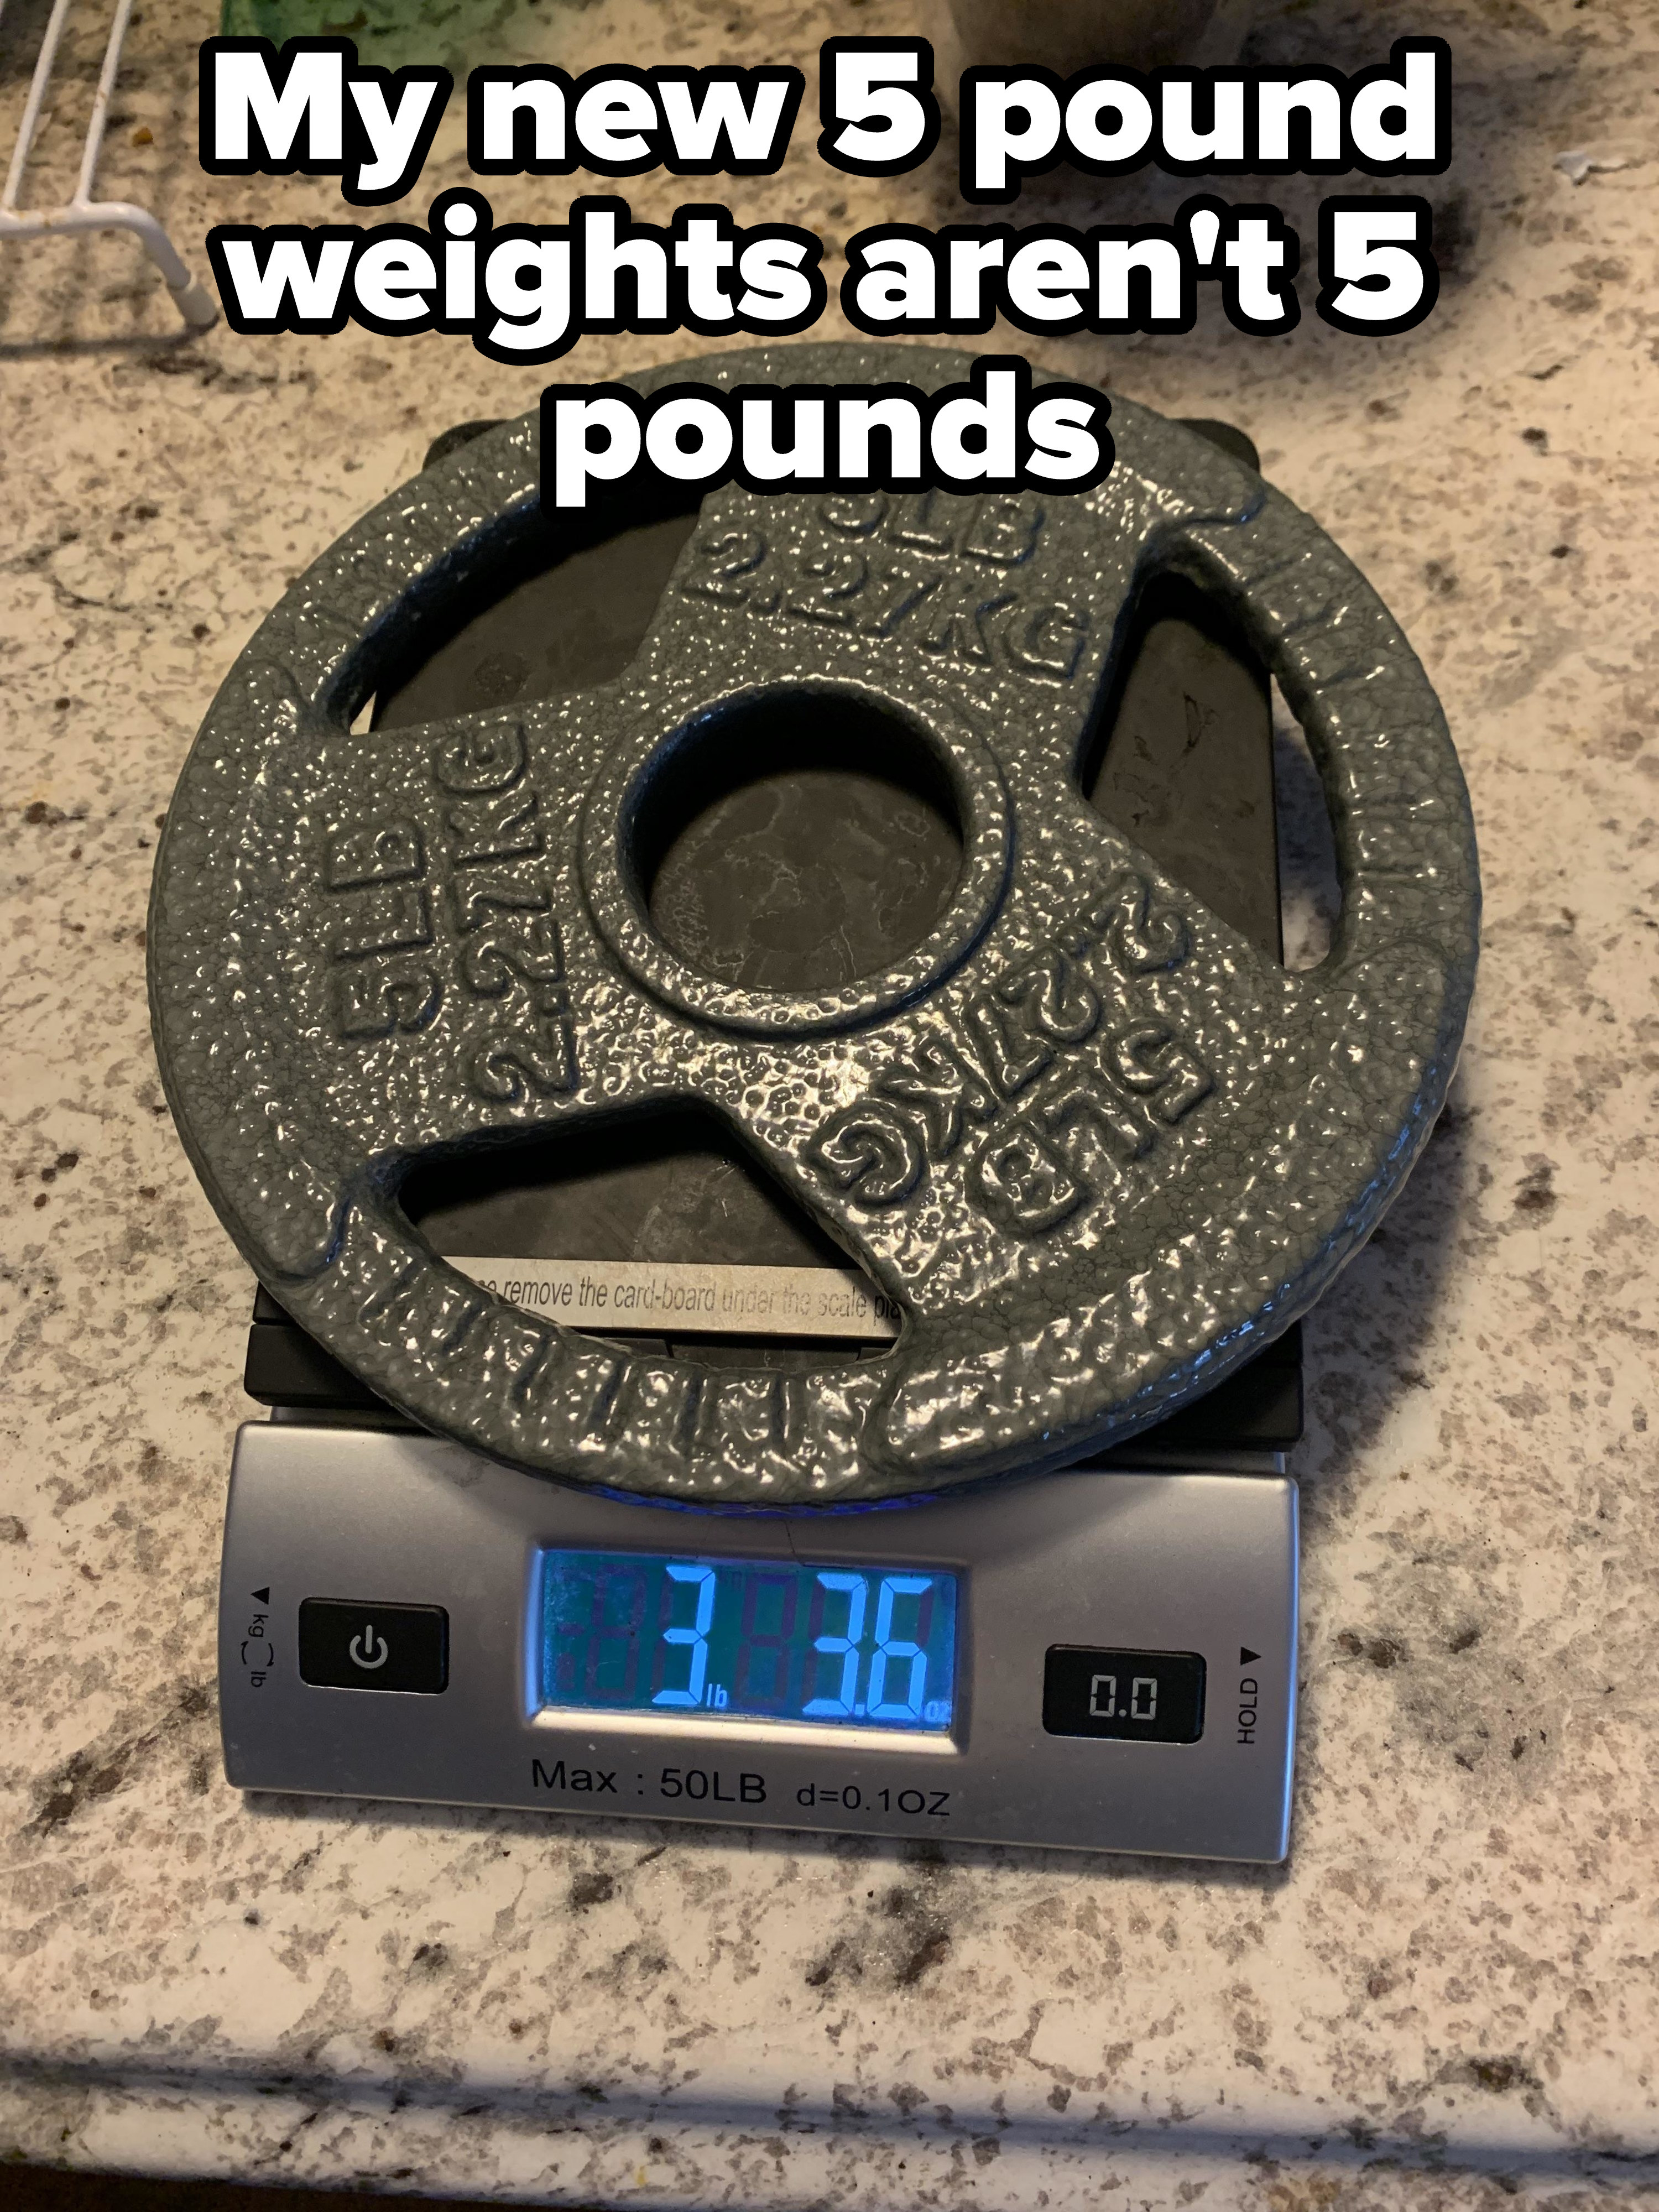 5-pound weights that are only 3 1/3 pounds